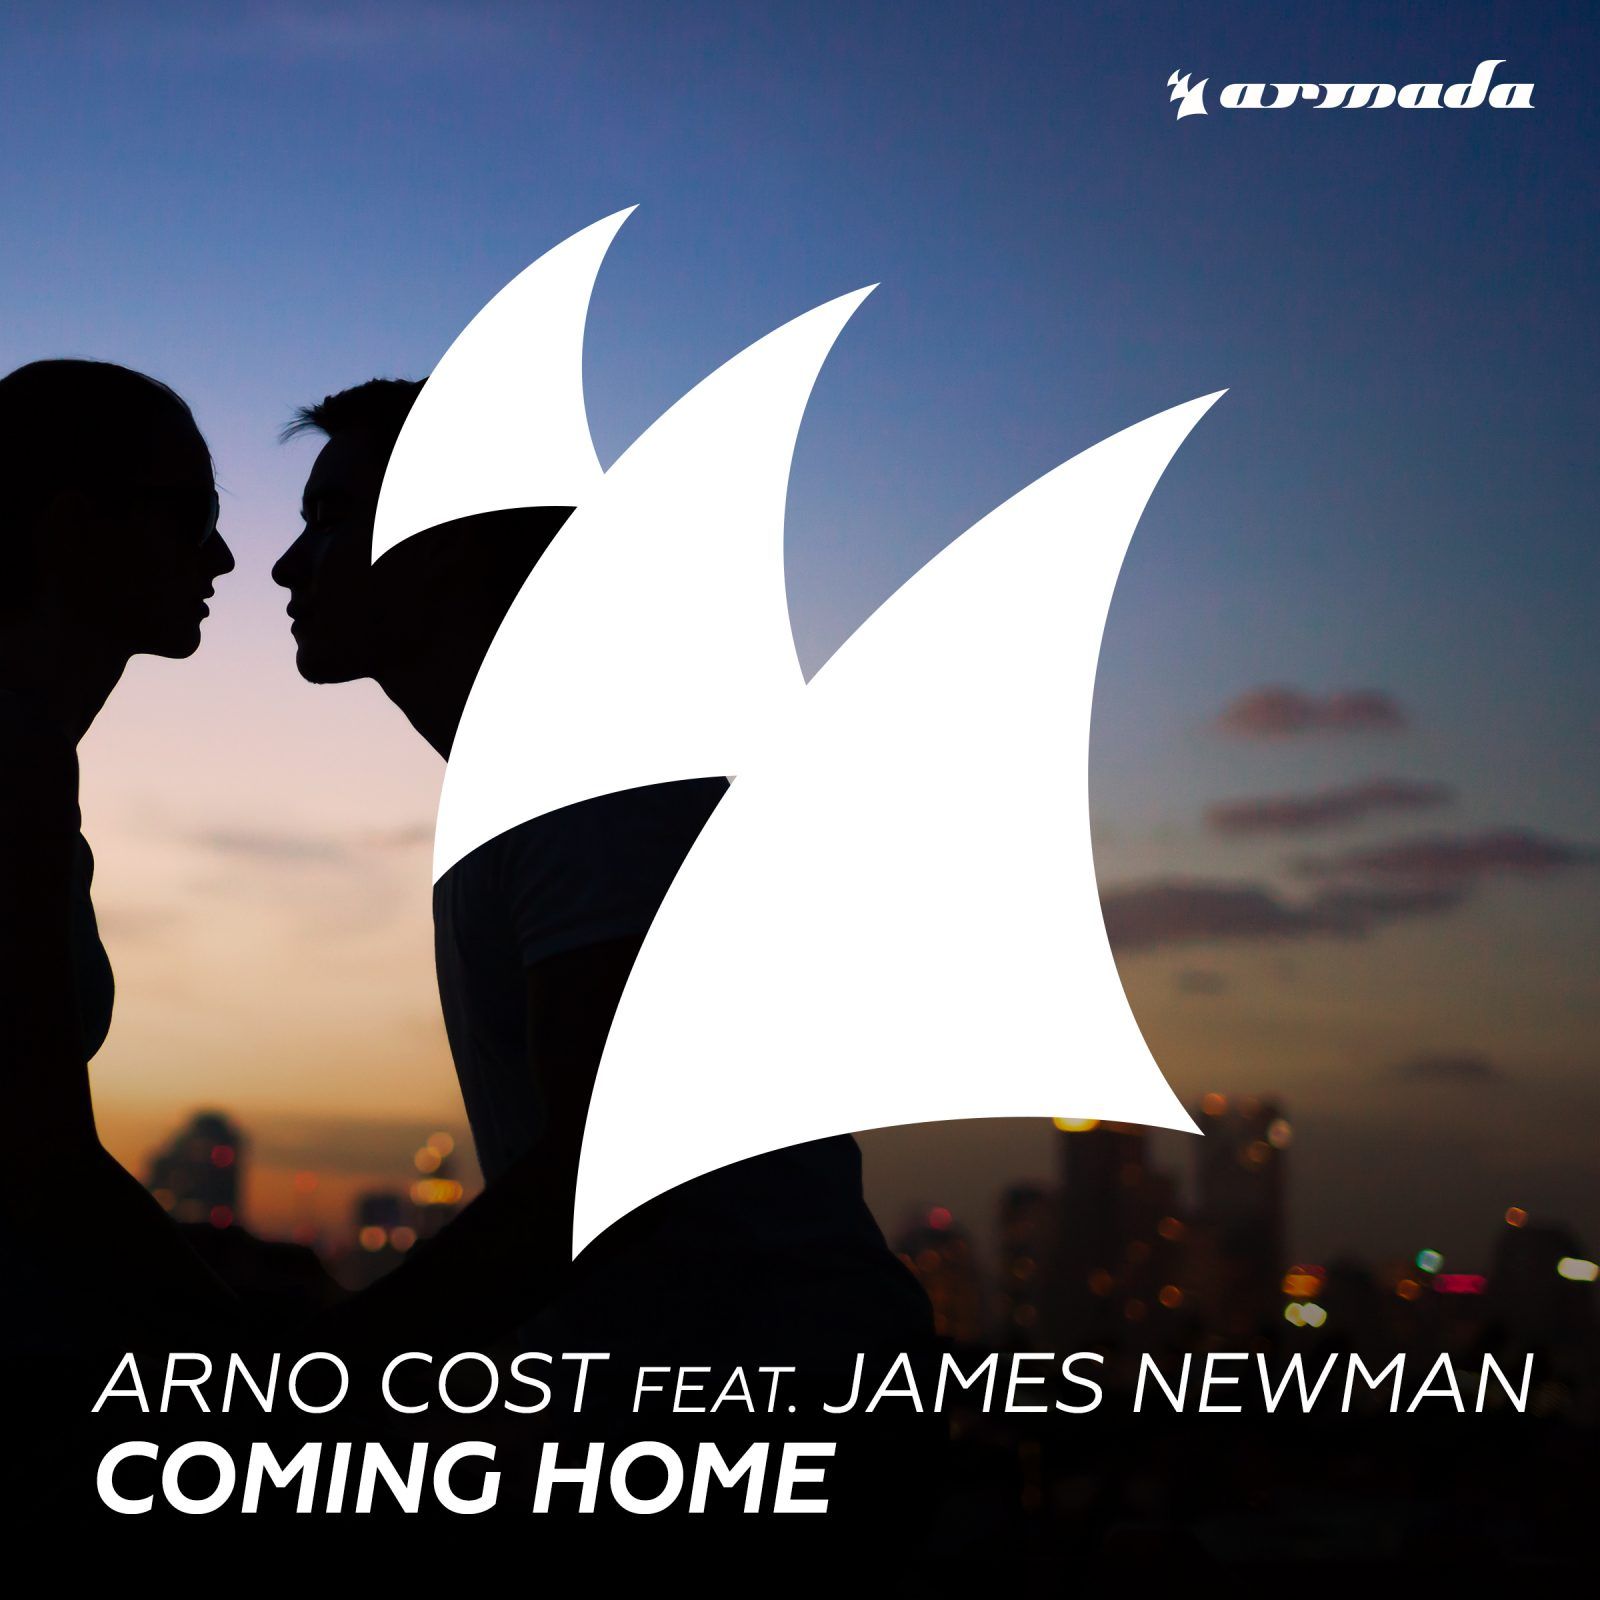 armas1082-arno-cost-feat.james-newman-coming-home-final1.jpg